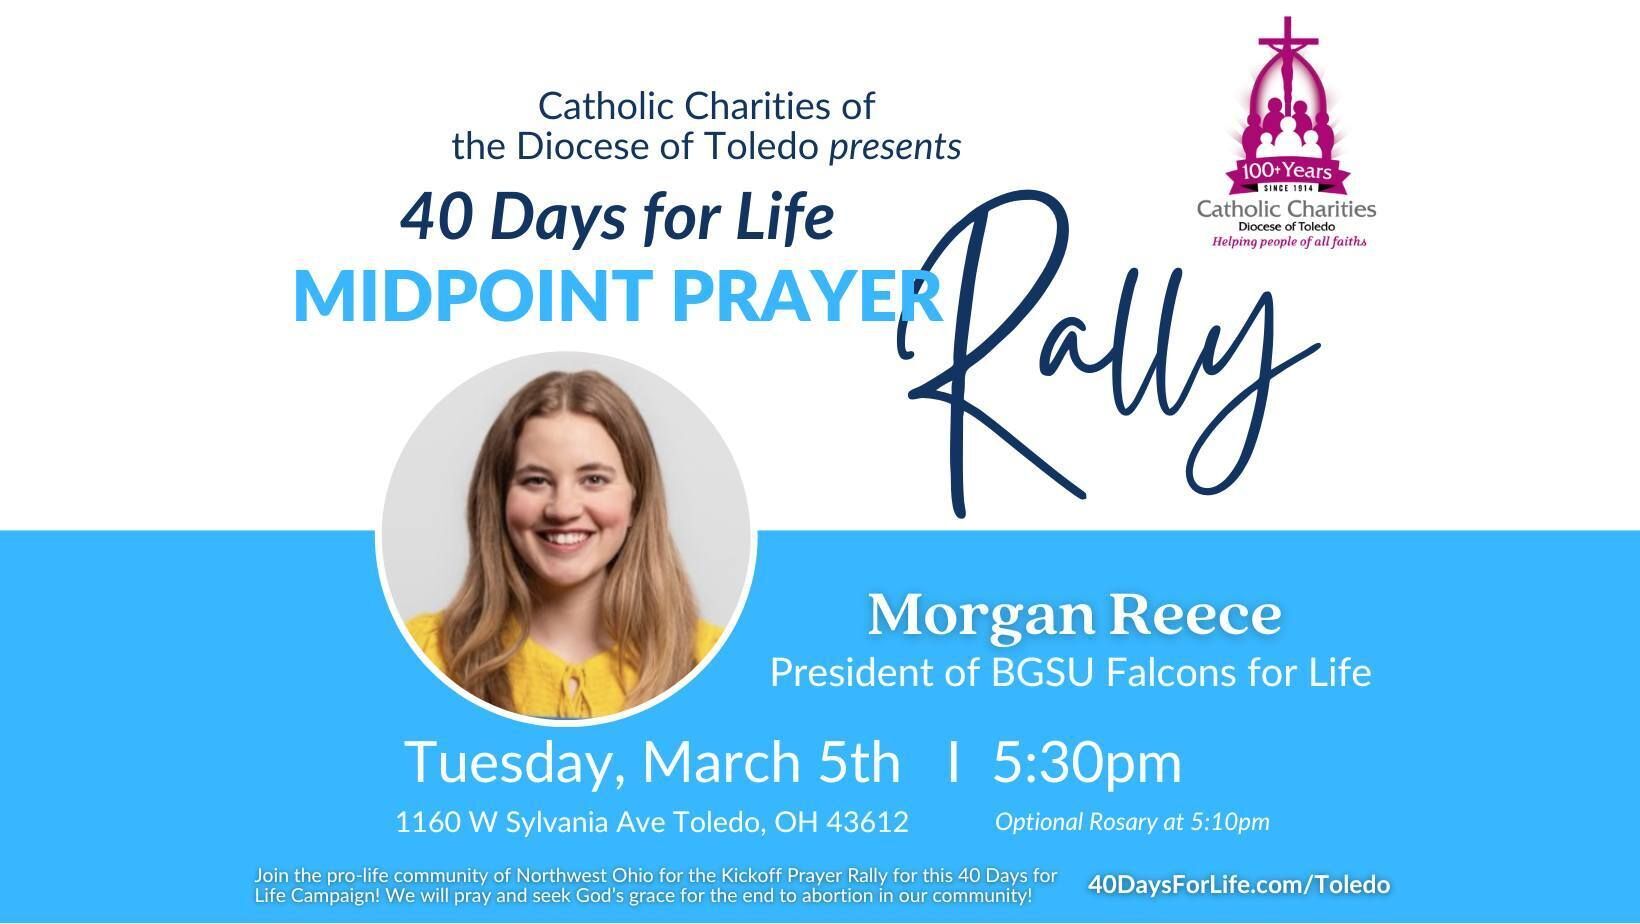 Attend Our 40 Days for Life Mid-Point Prayer Rally March 5